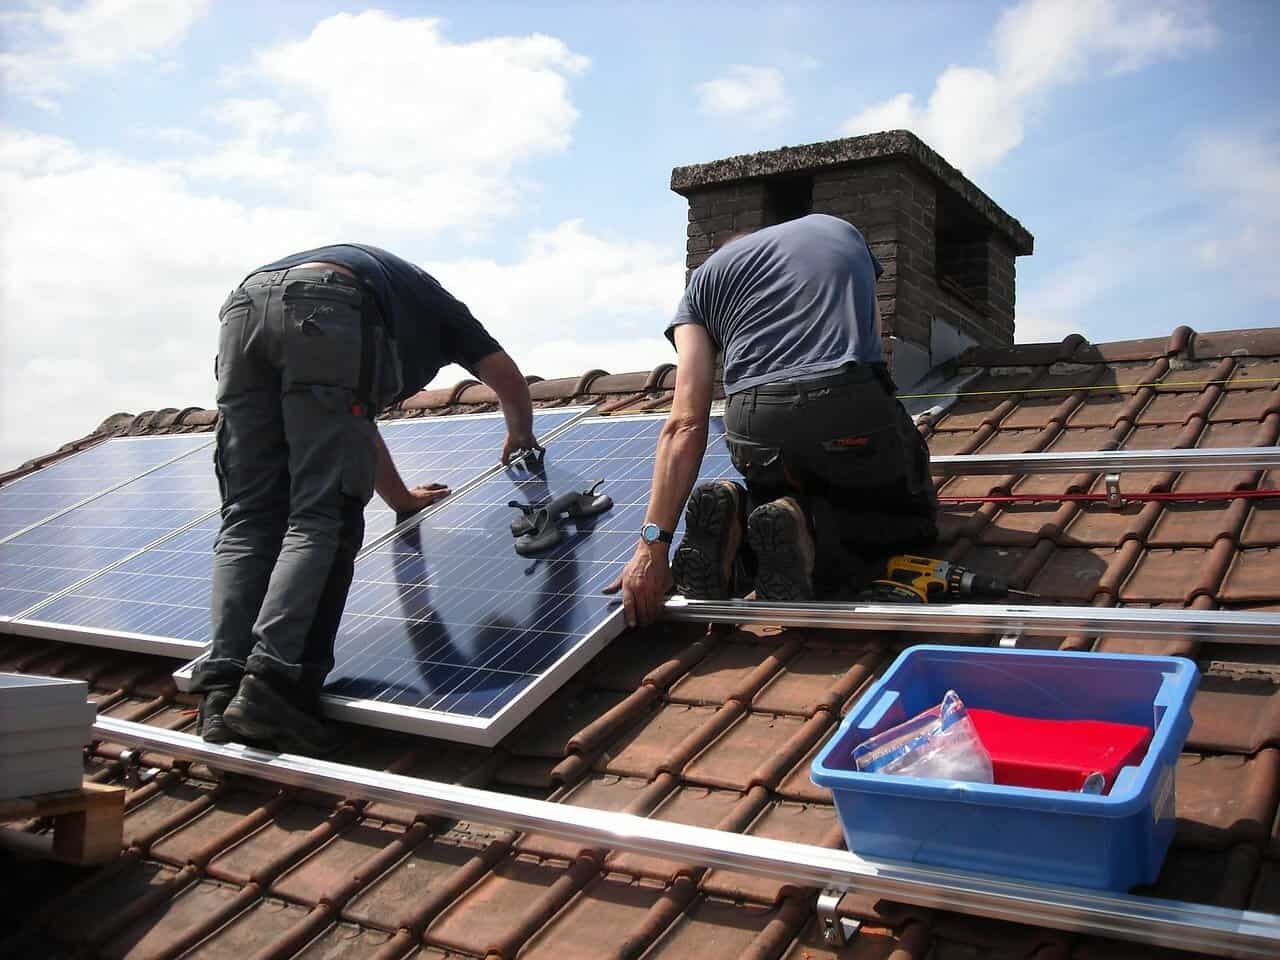 Two men are installing solar panels on the roof of a home with clay shingles.